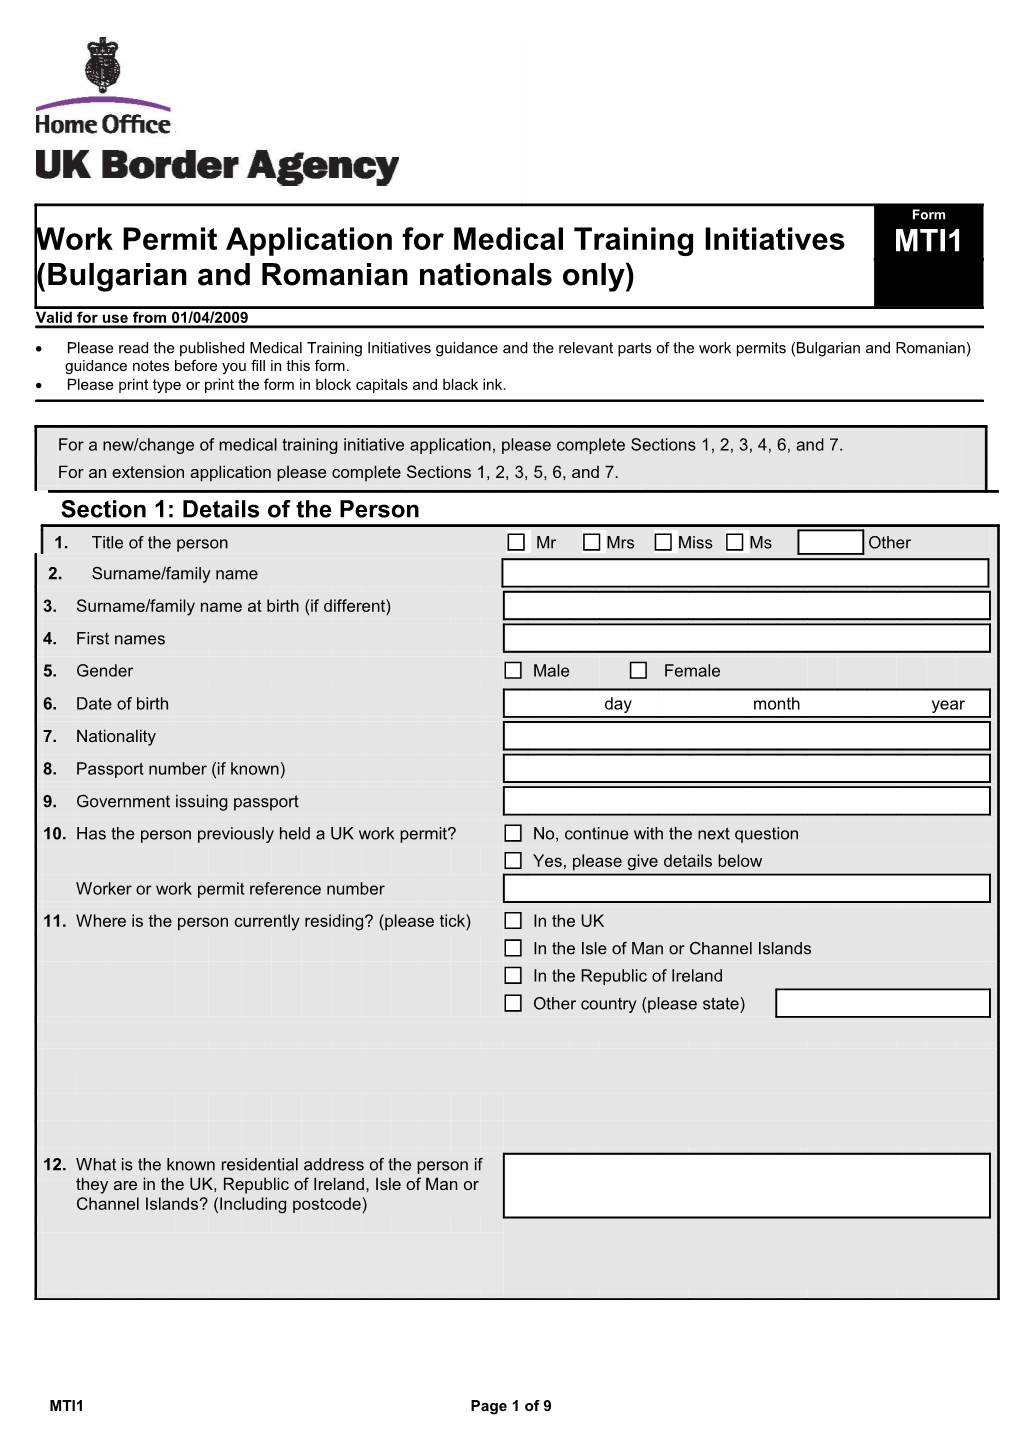 Work Permit Application for Medical Training Initiatives